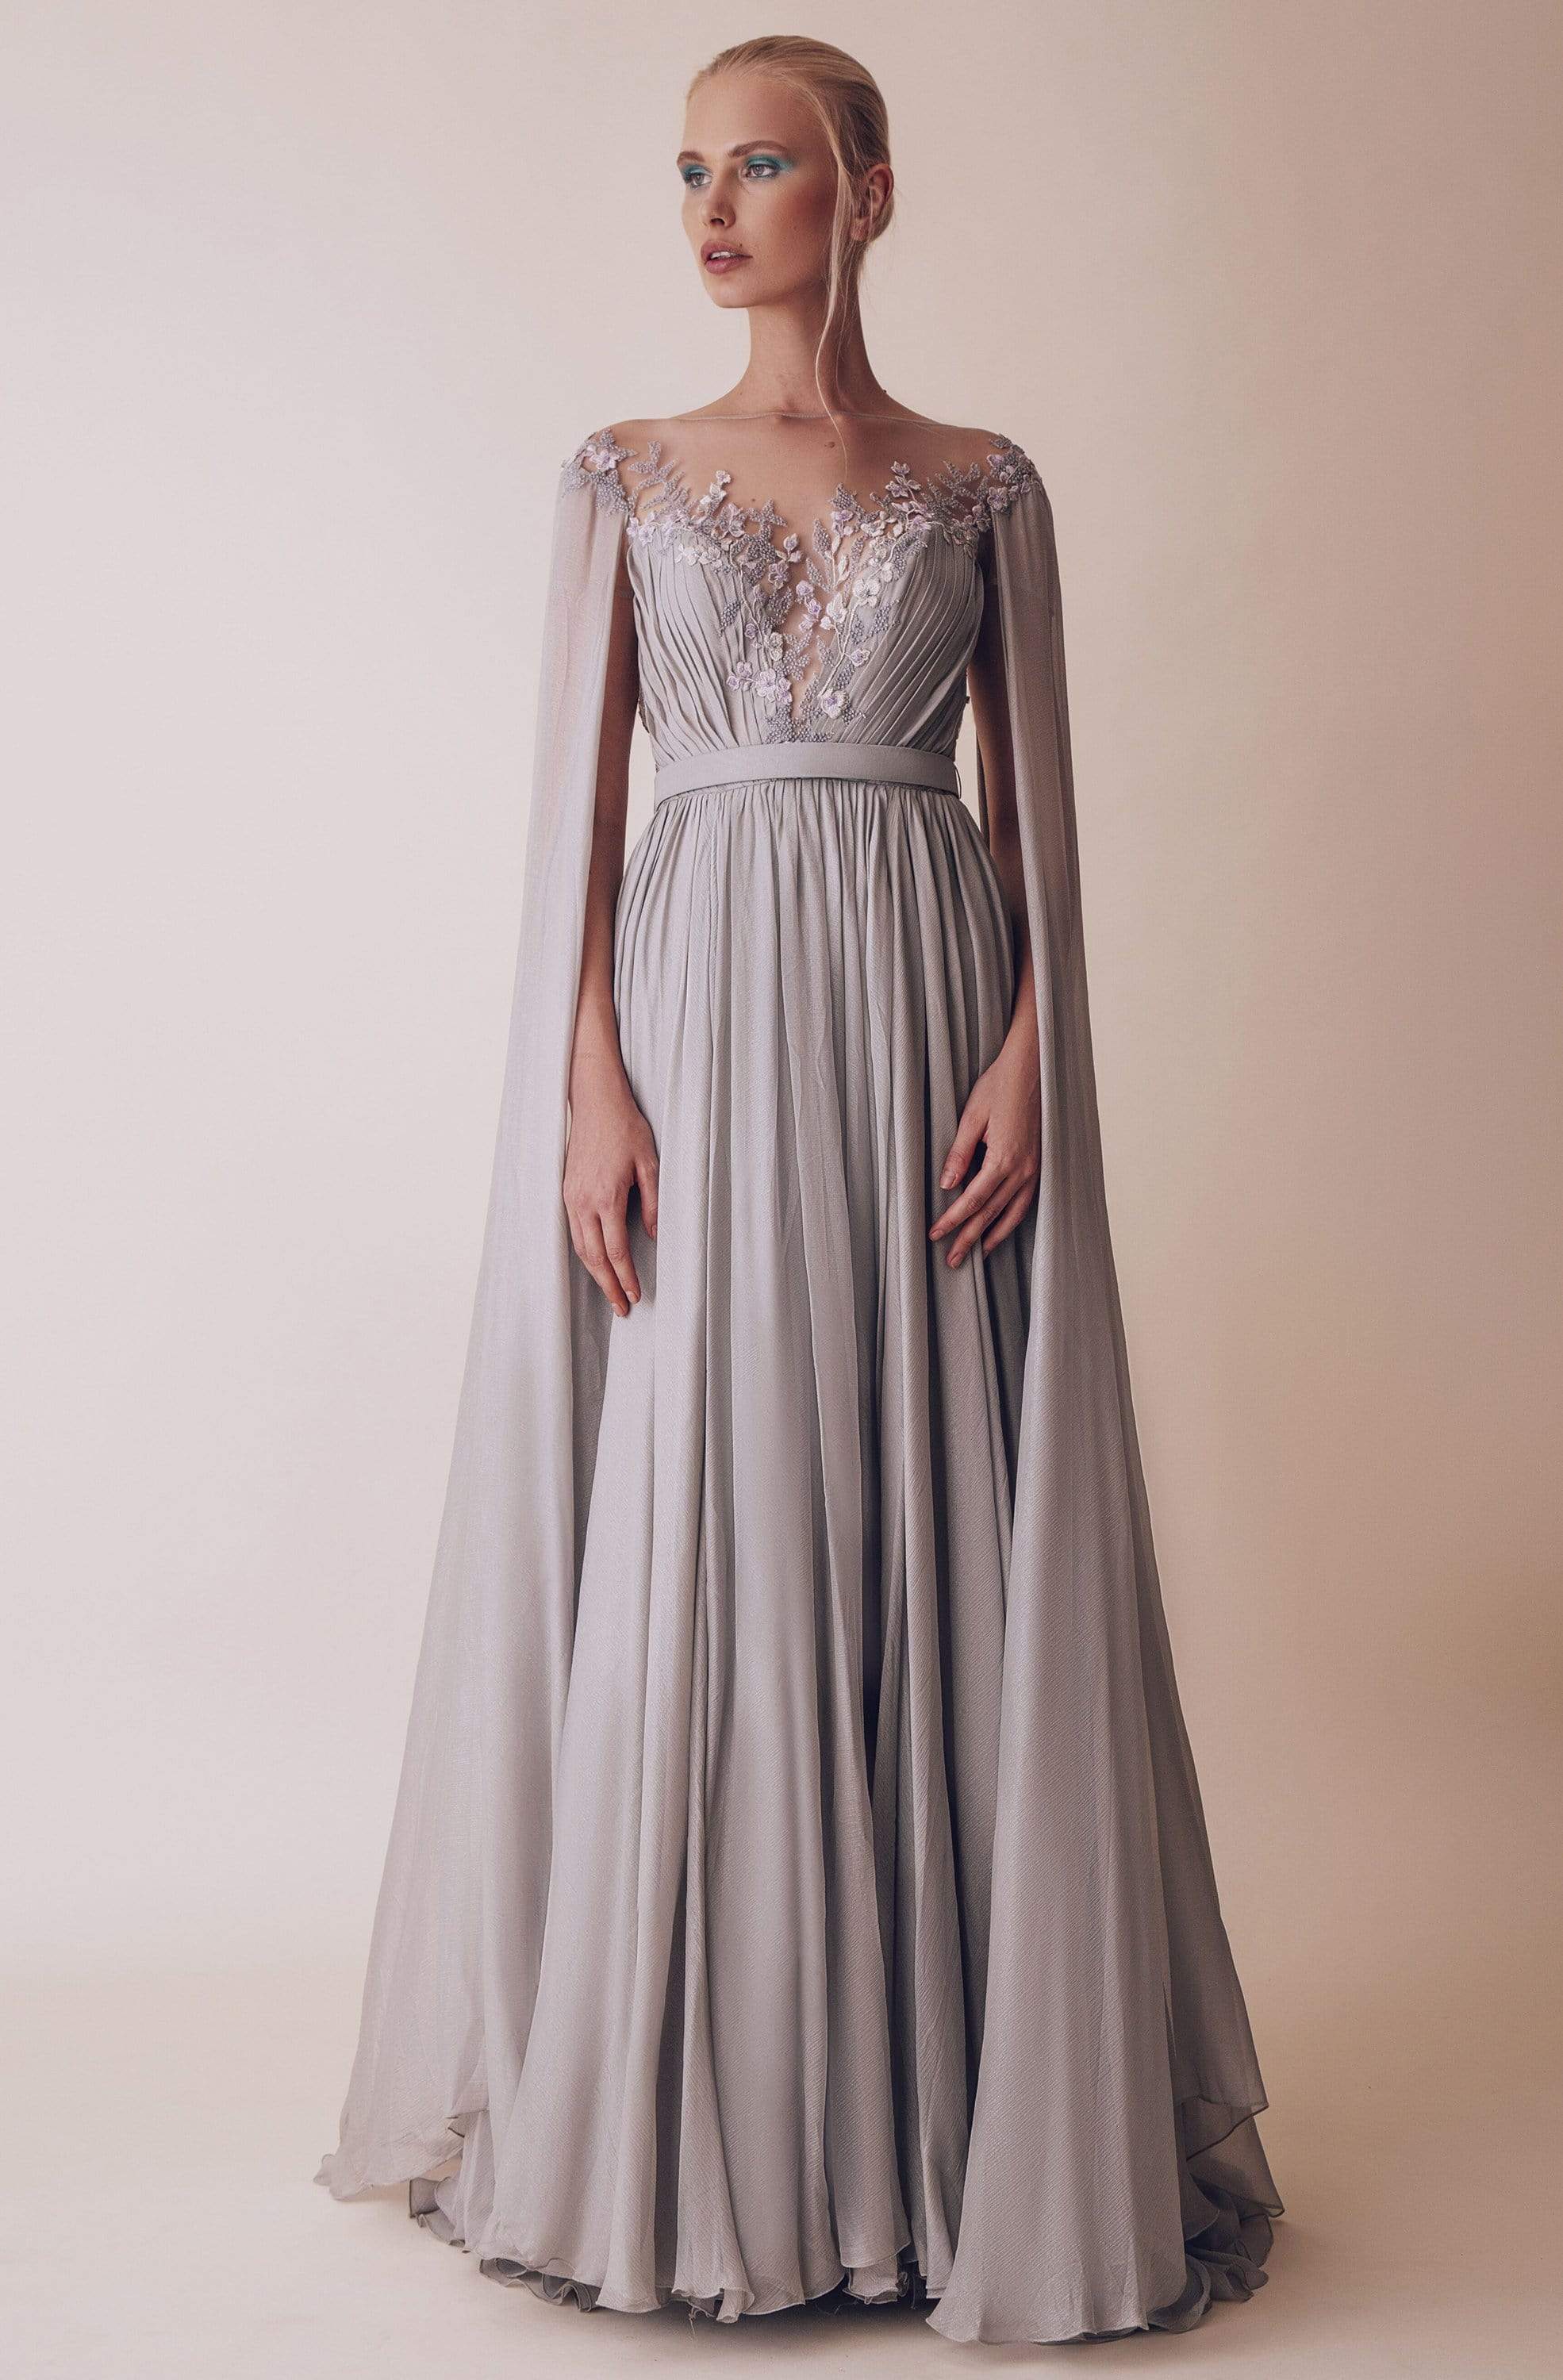 Image of Gatti Nolli Couture - OP-4963 Embroidered Illusion Bateau A-line Gown